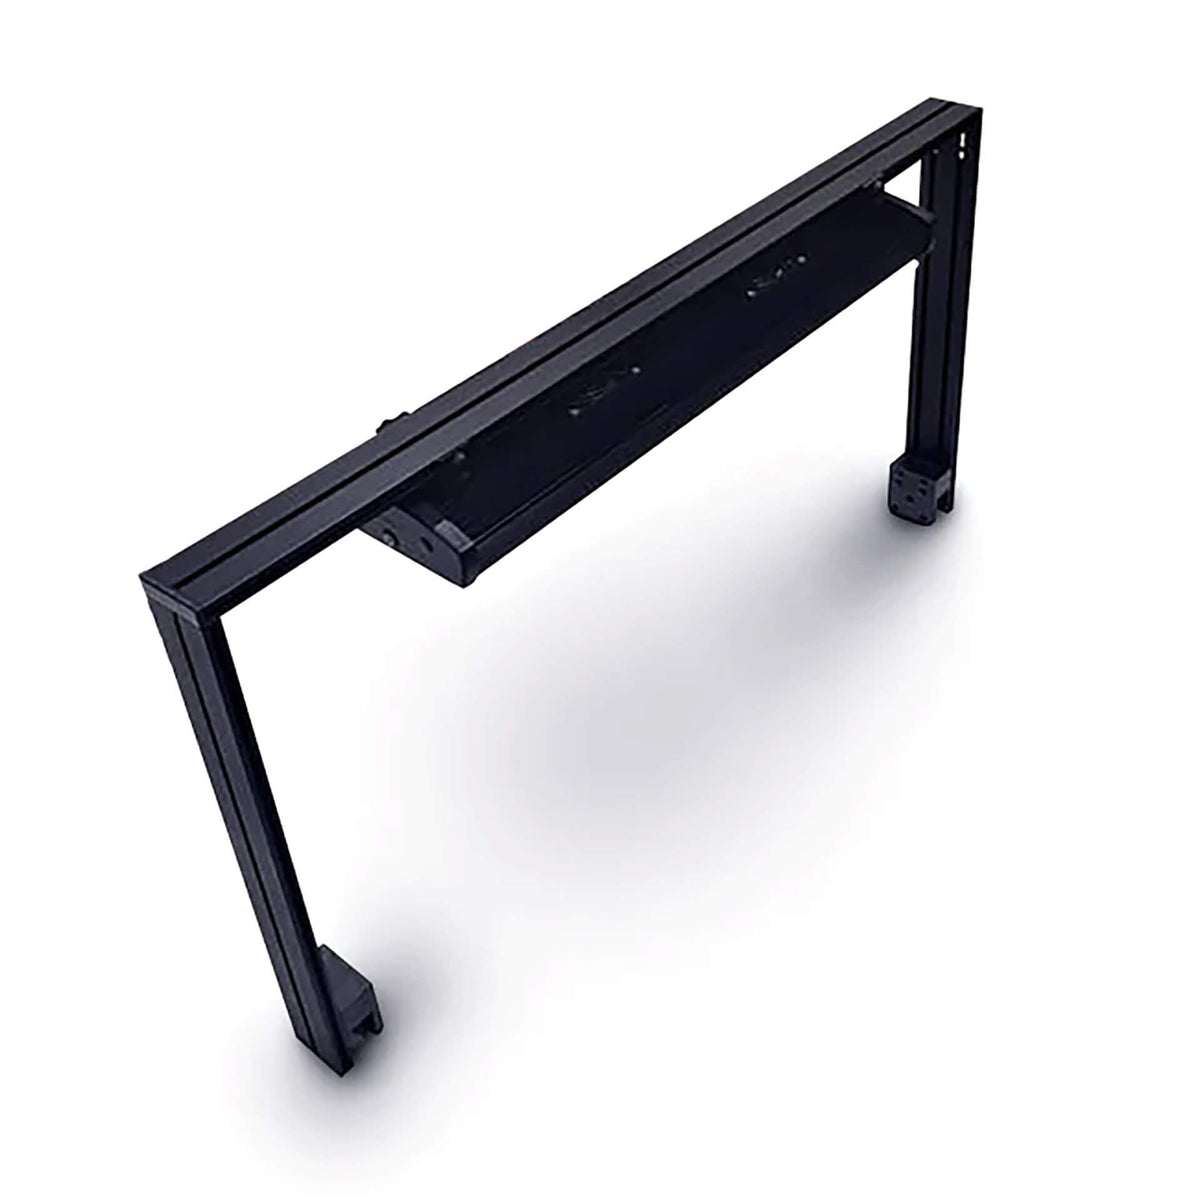 Illumagic 120cm Rail Only Mounting System - In Store Pick Up Only